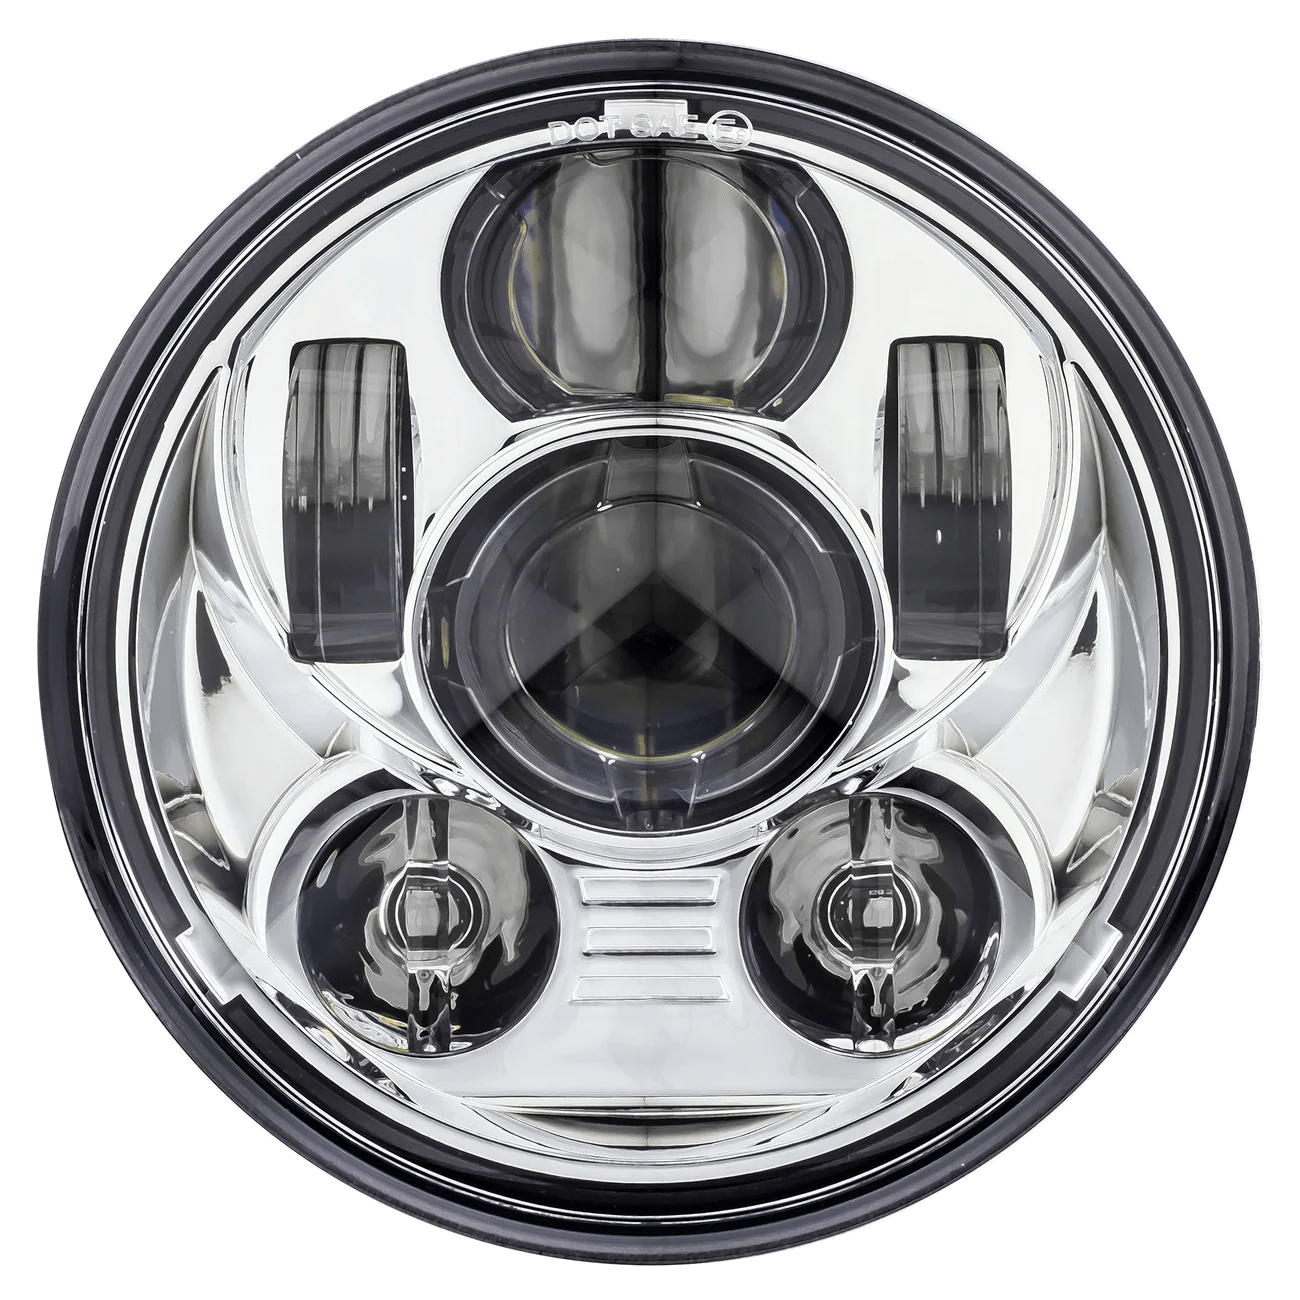 Eagle Lights 5 3/4" LED Headlight Kit for 2018 and Newer Harley Davidson Softail Low Rider S